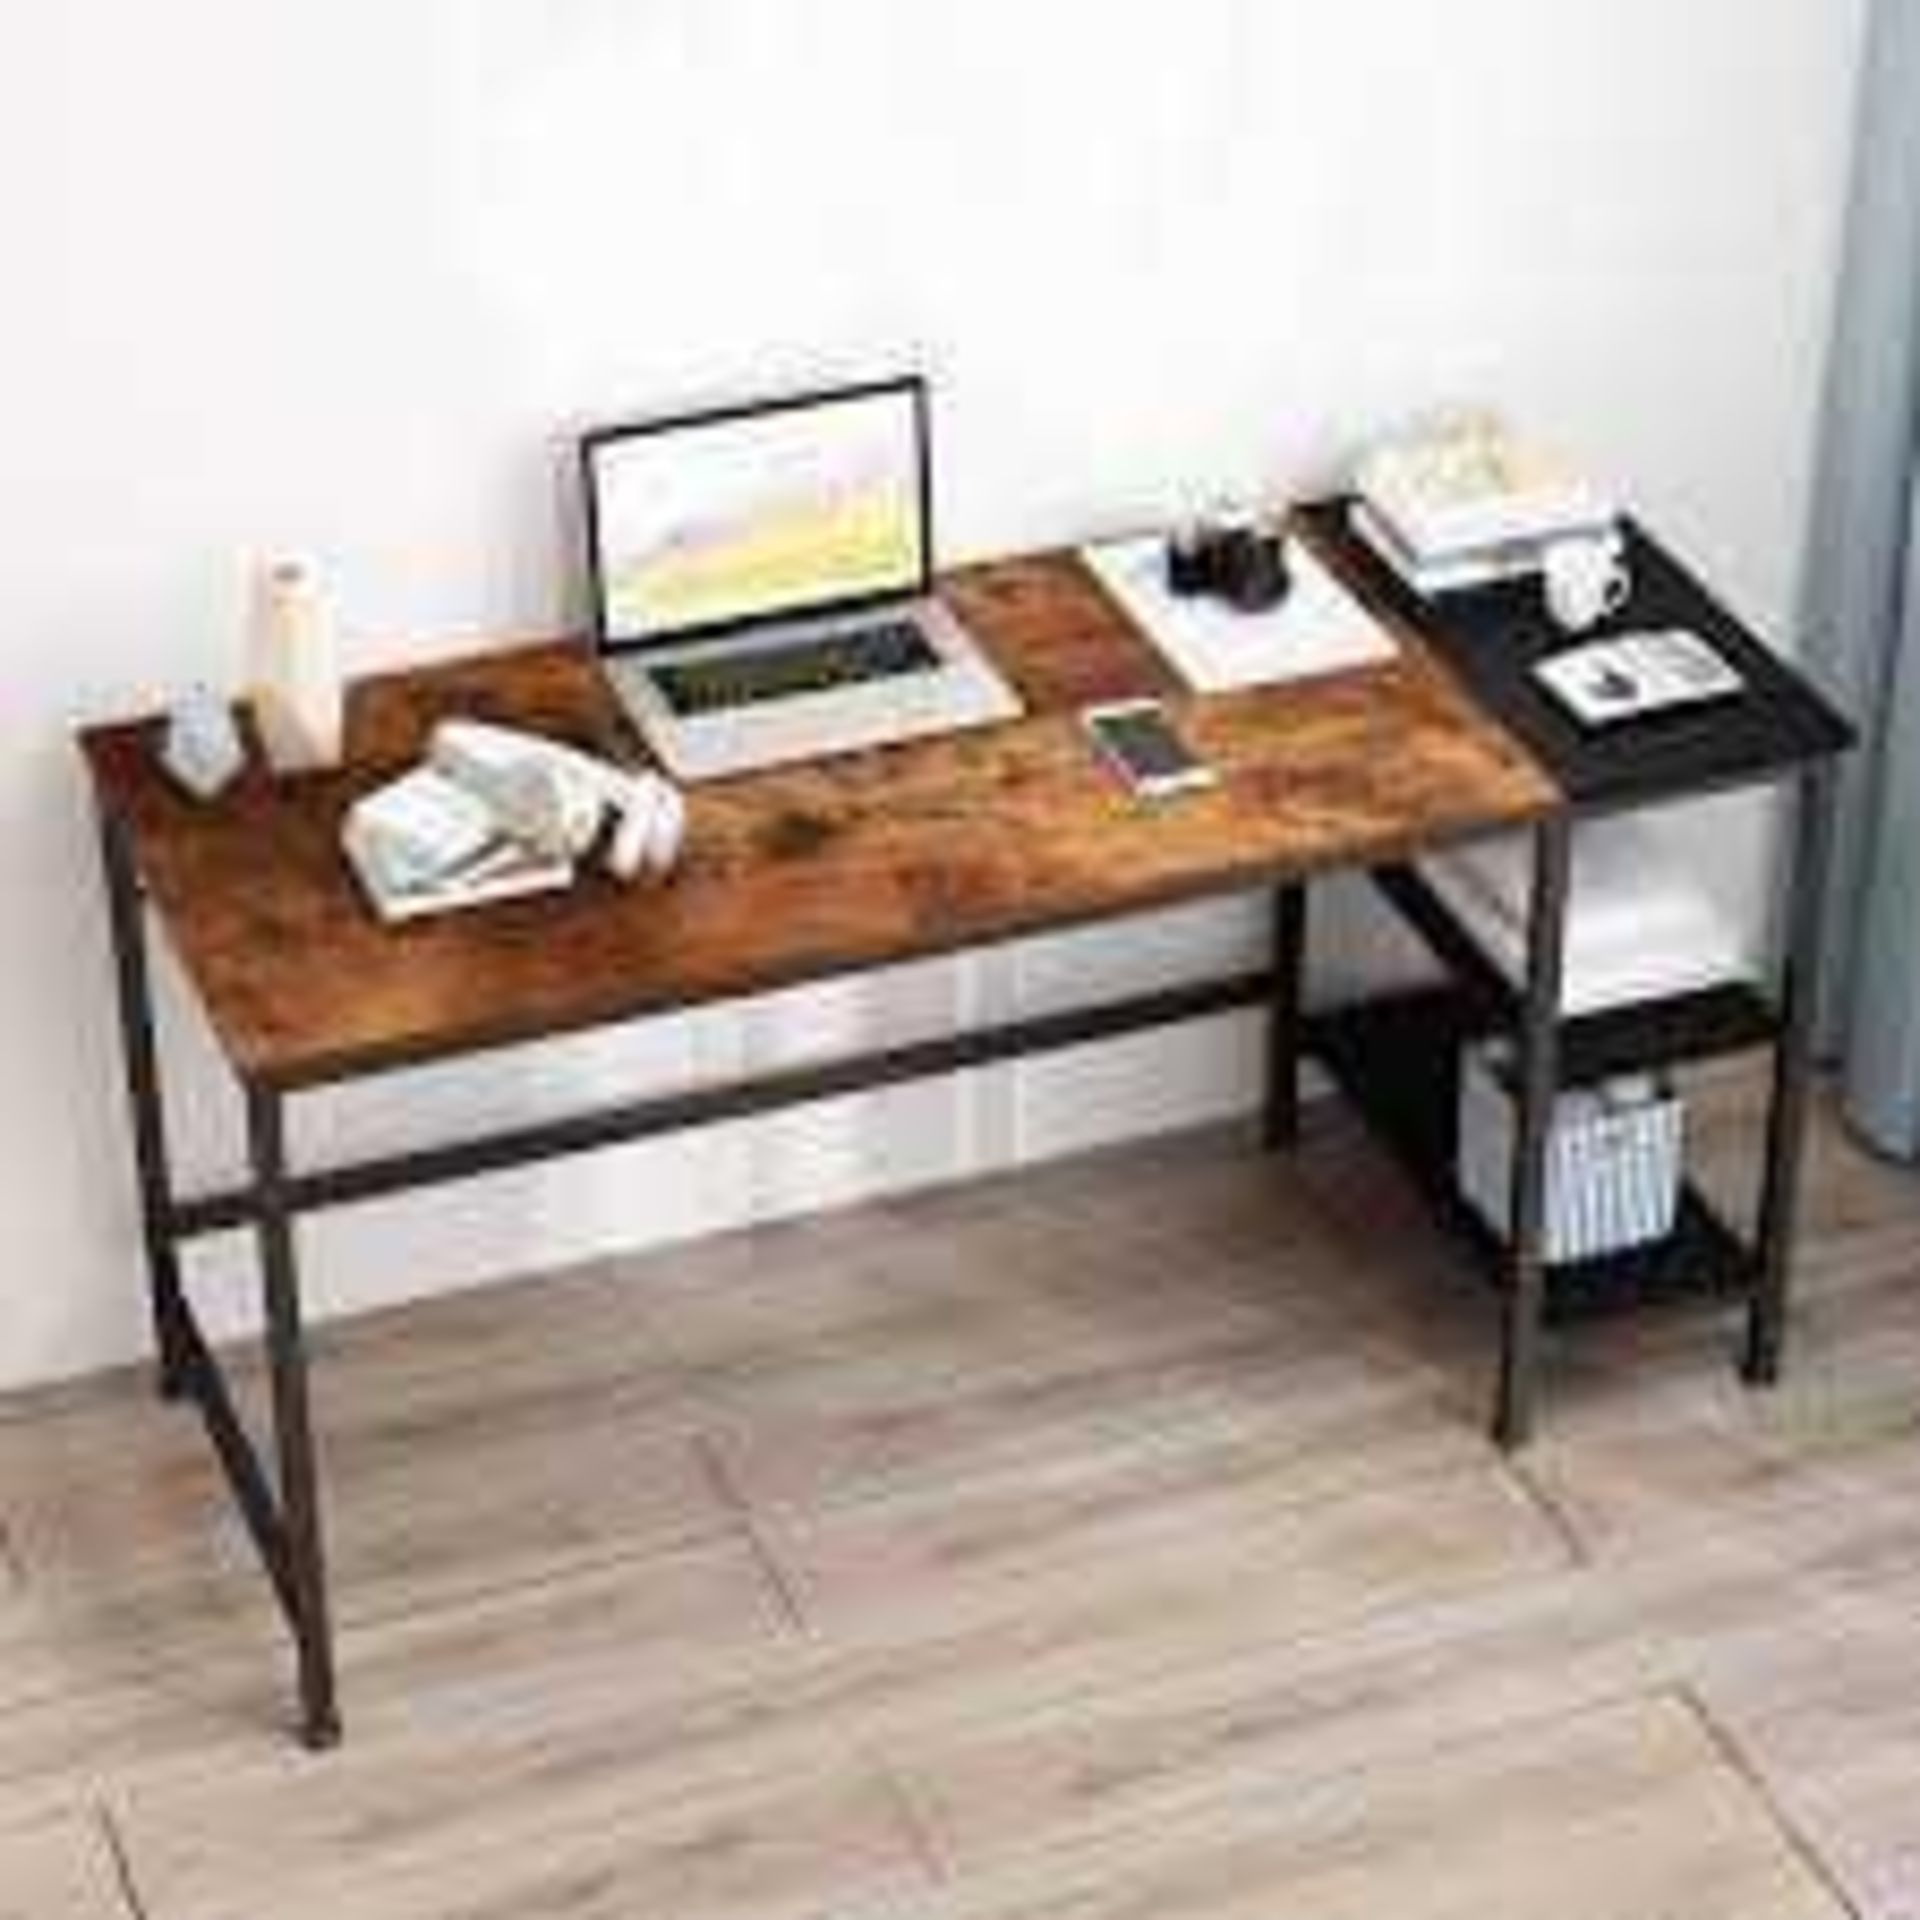 RRP £240 Boxed Joiscope Computer Desk, Desk With Shelves, Laptop Table, Study Table, Writing Desk, I